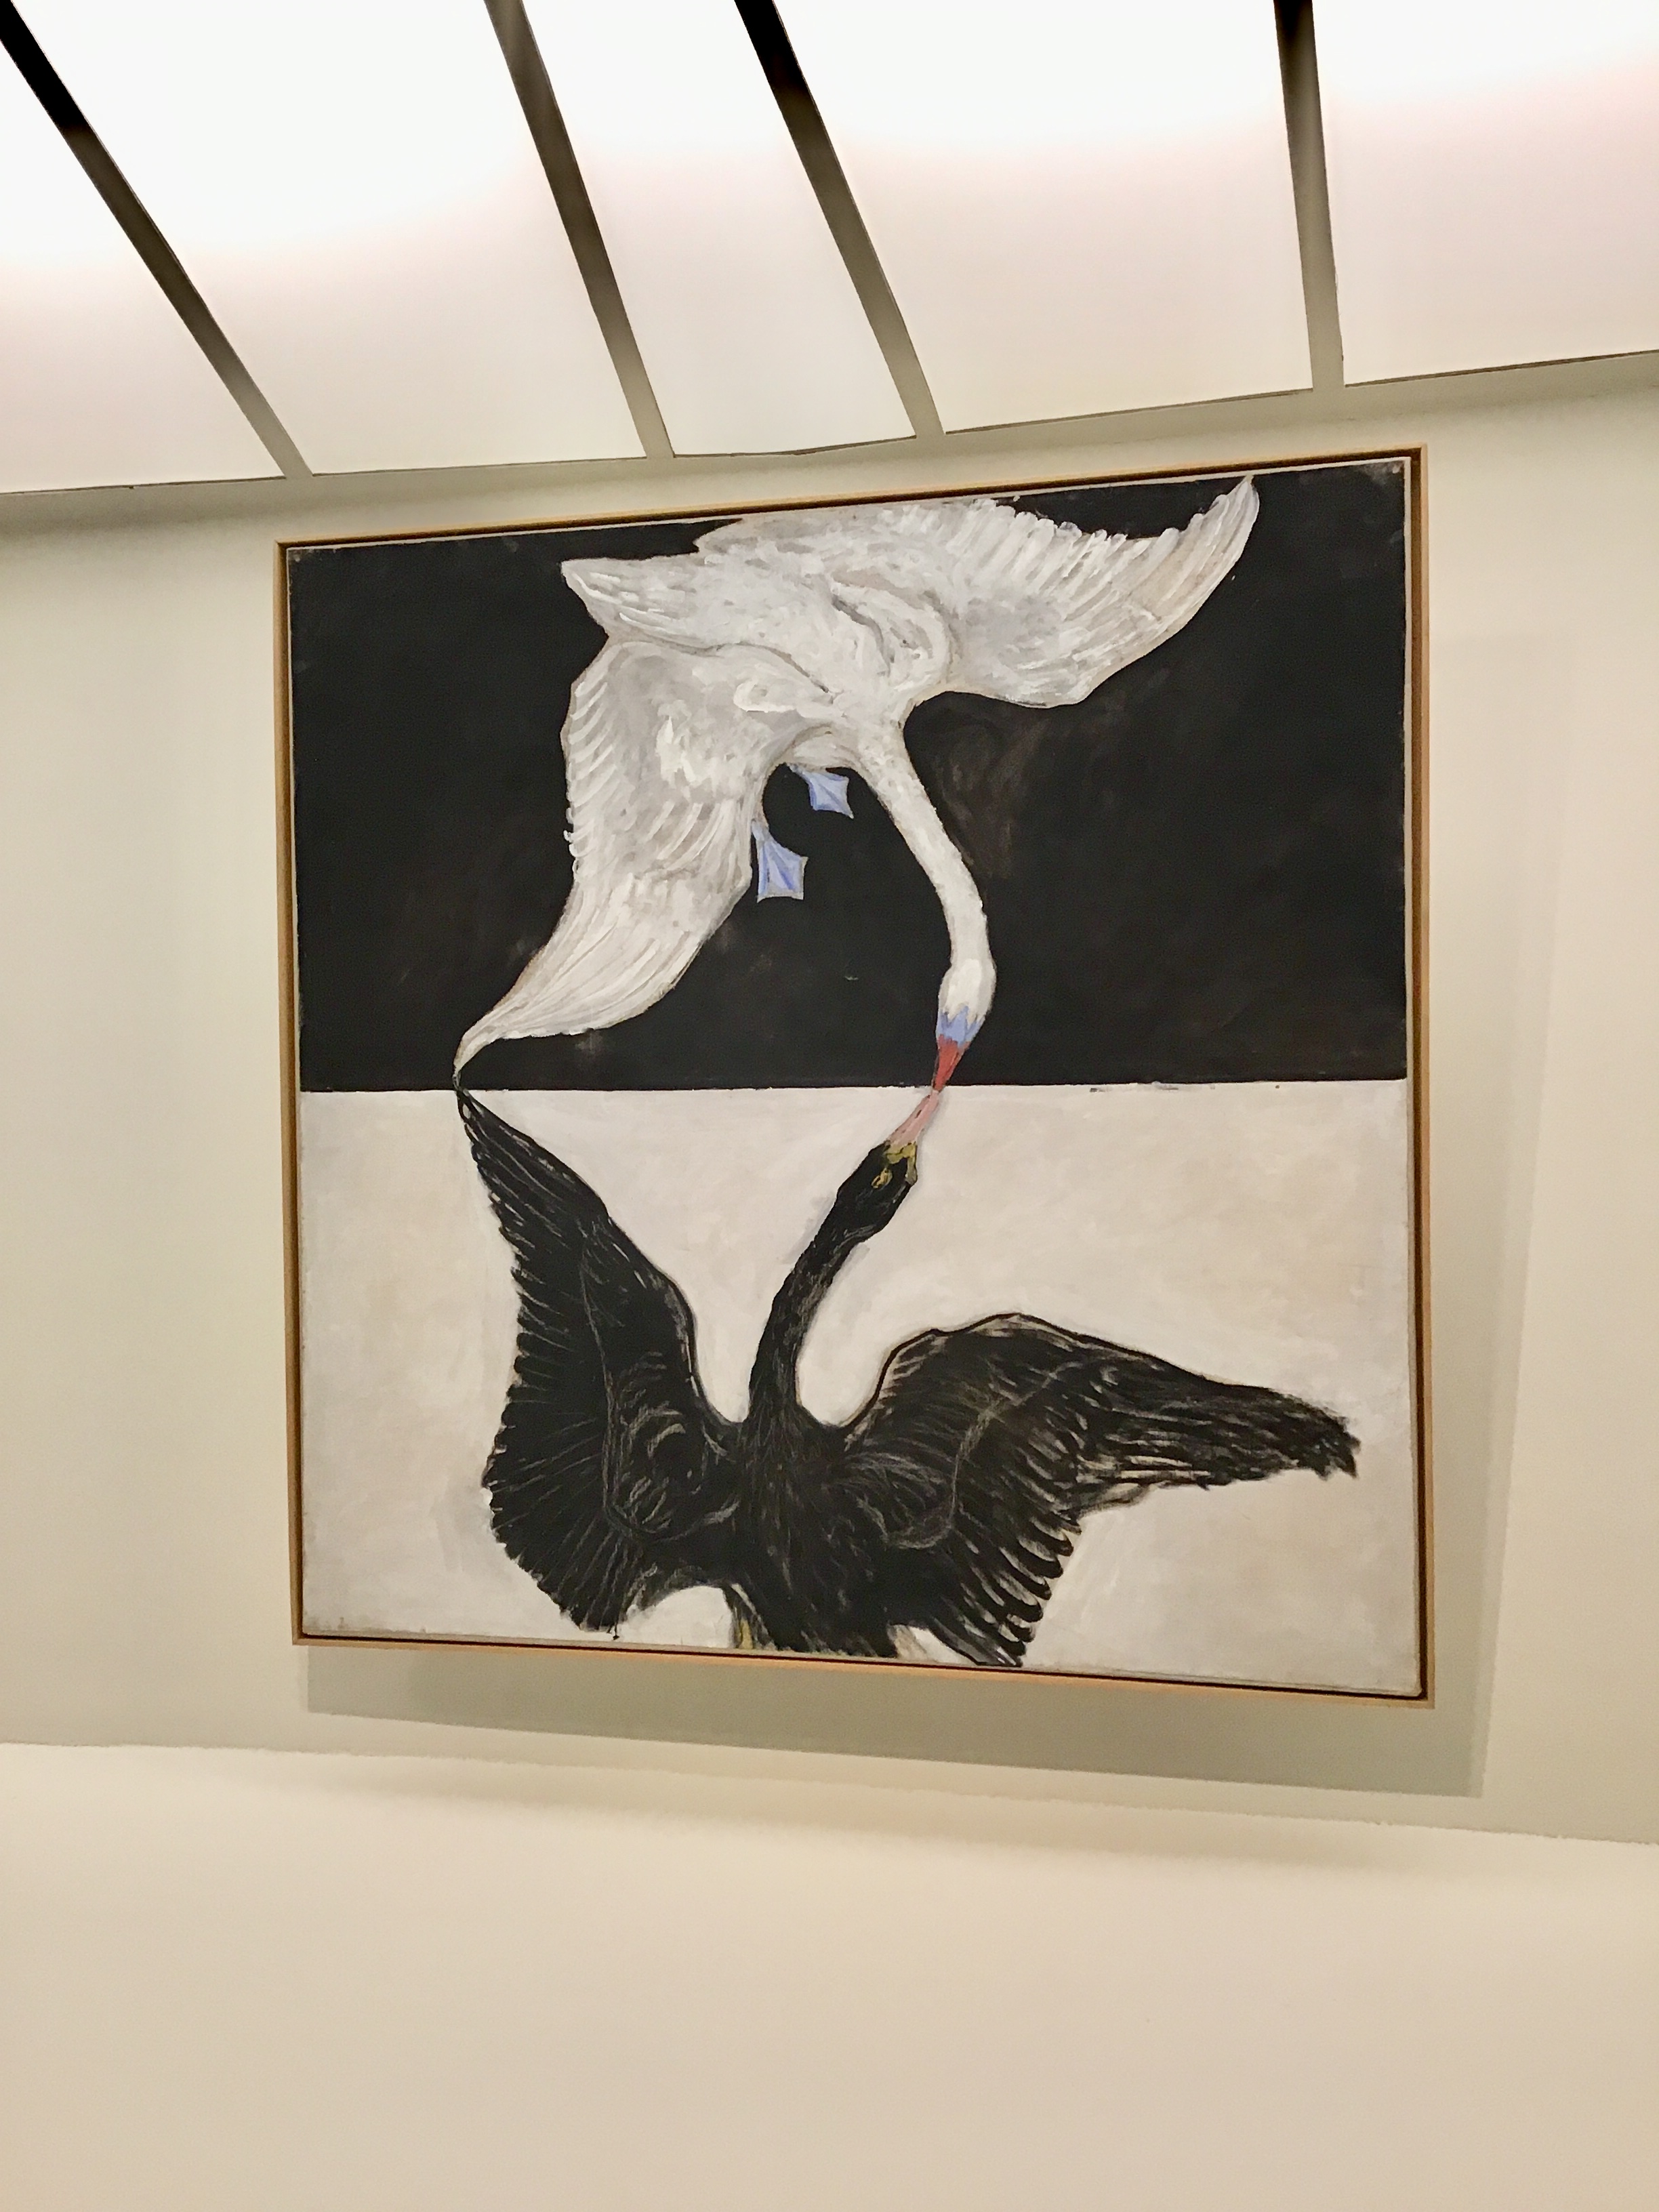 The Guggenheim Museum in New York City exhibited the largest solo show of af Klint’s work in the United States.